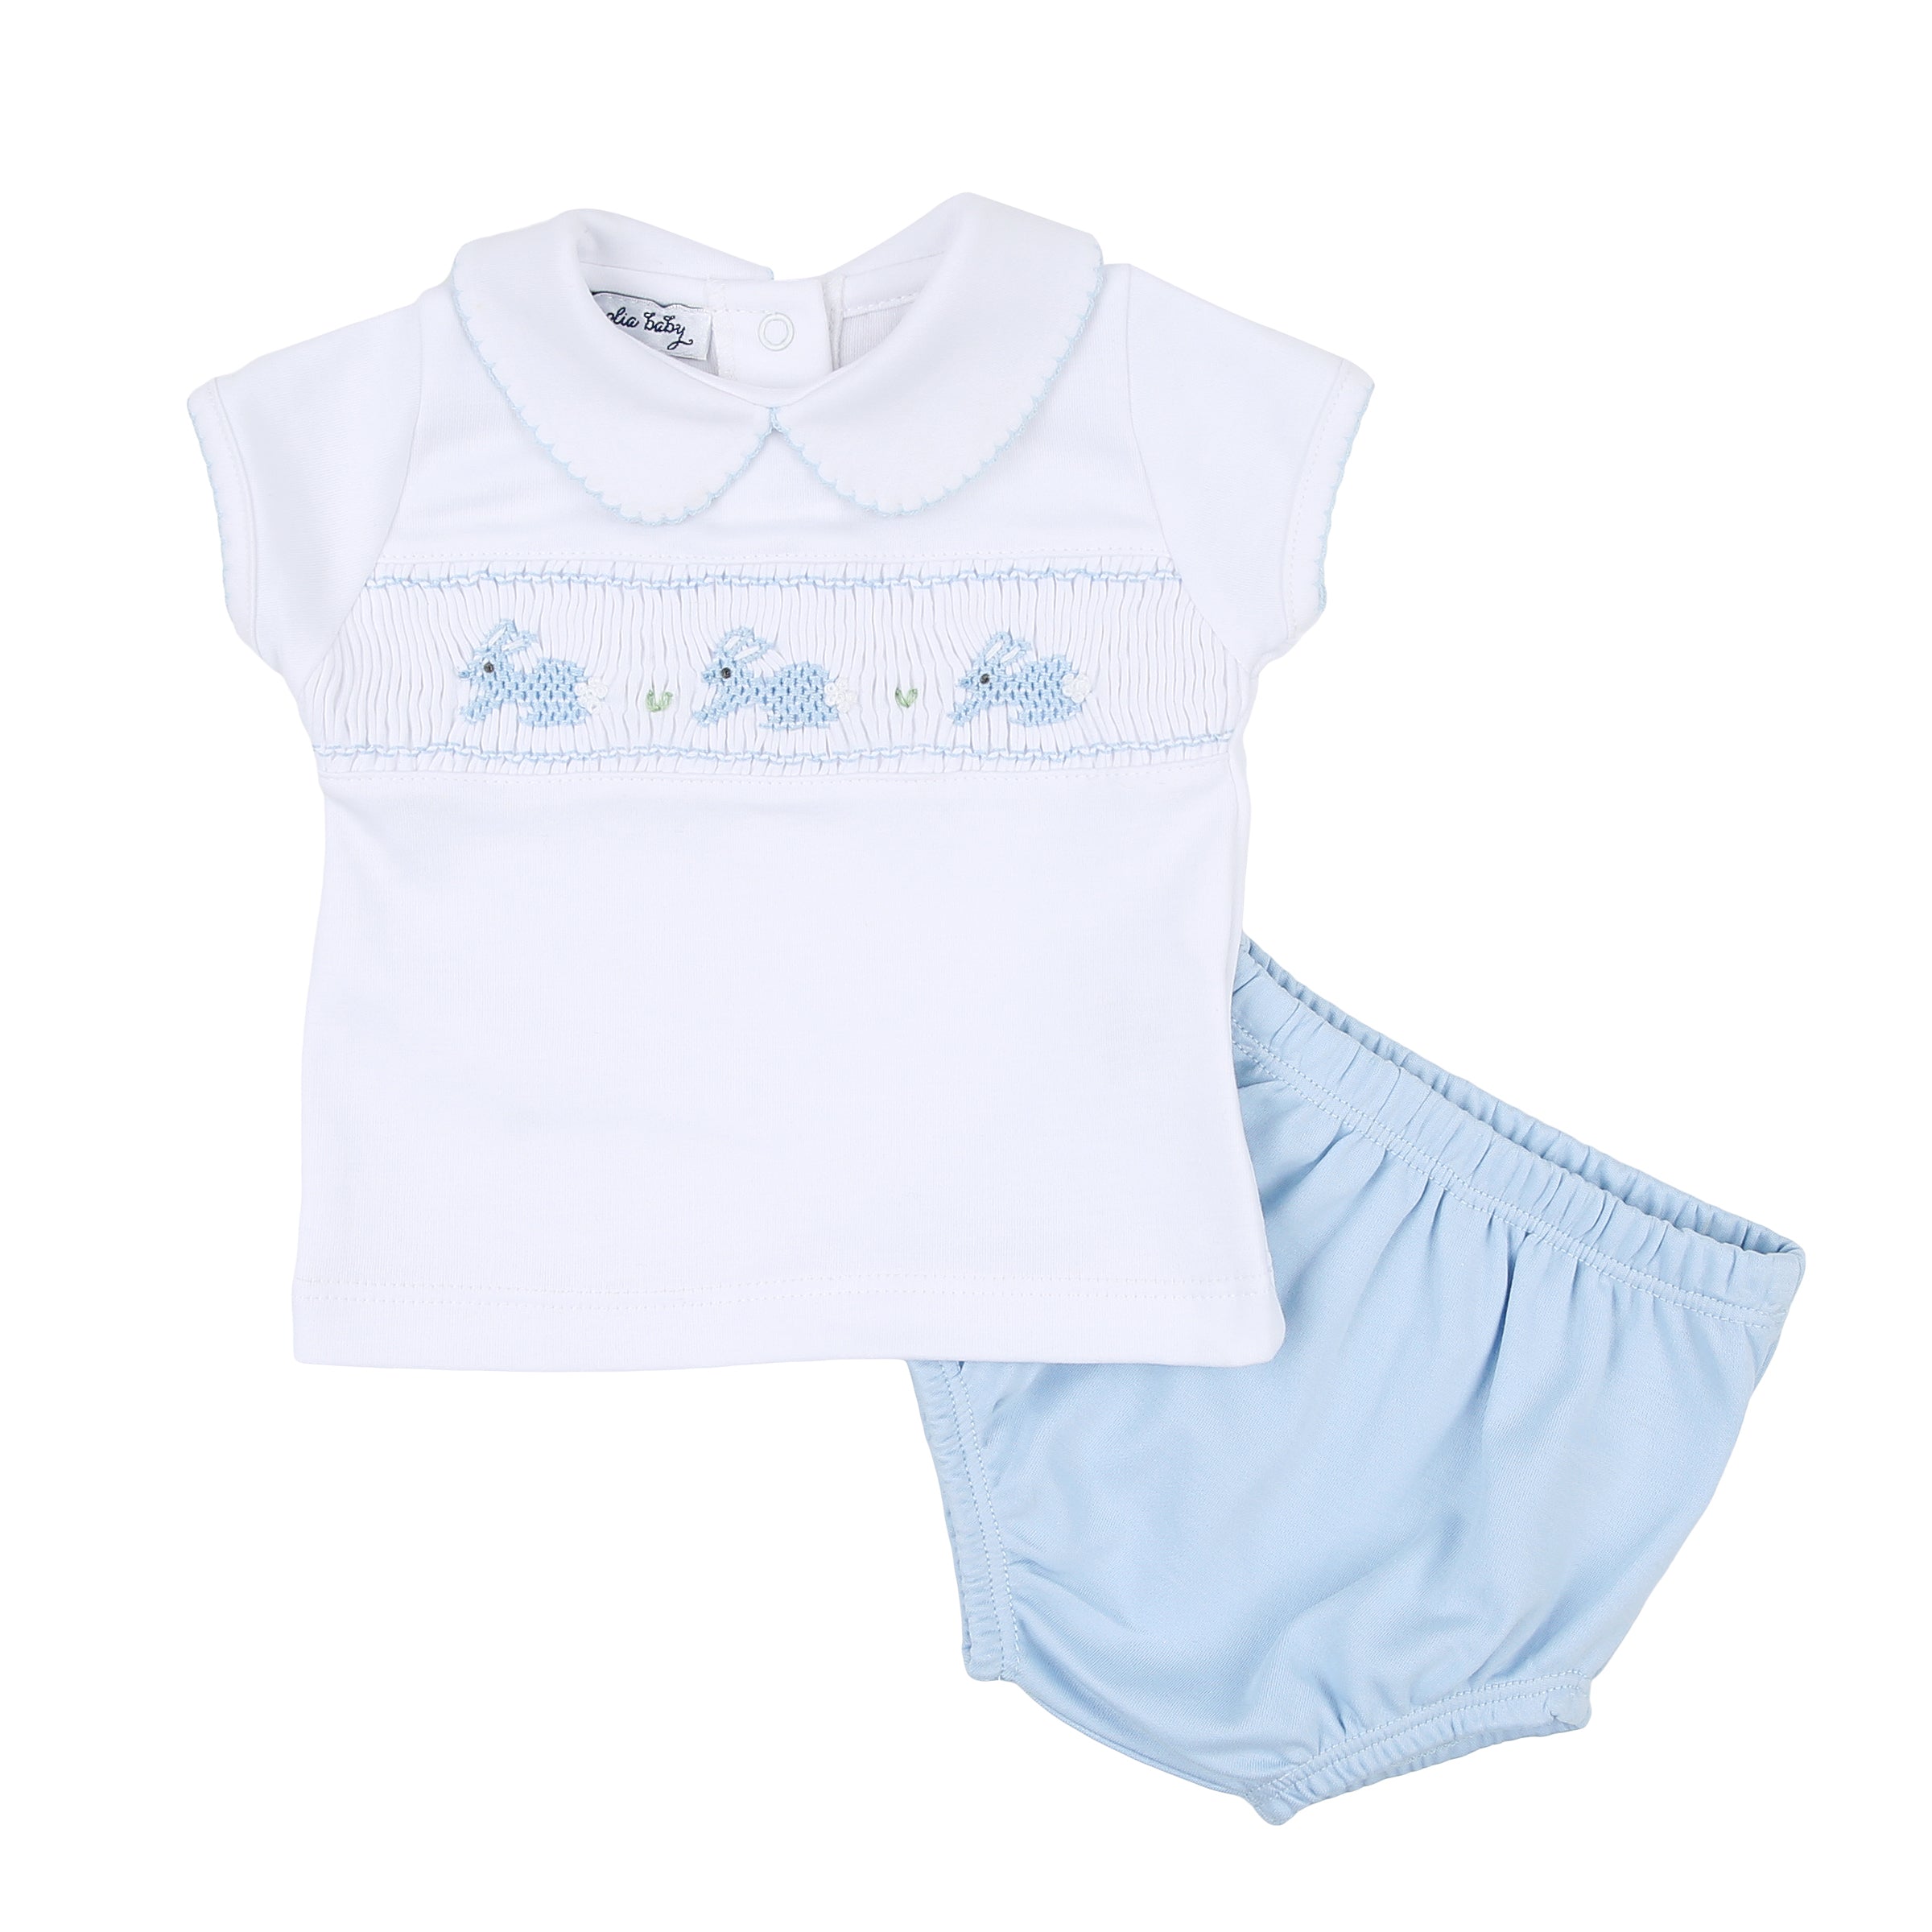 Pastel Bunny Classics Smocked Collared Diaper Cover Set - Blue